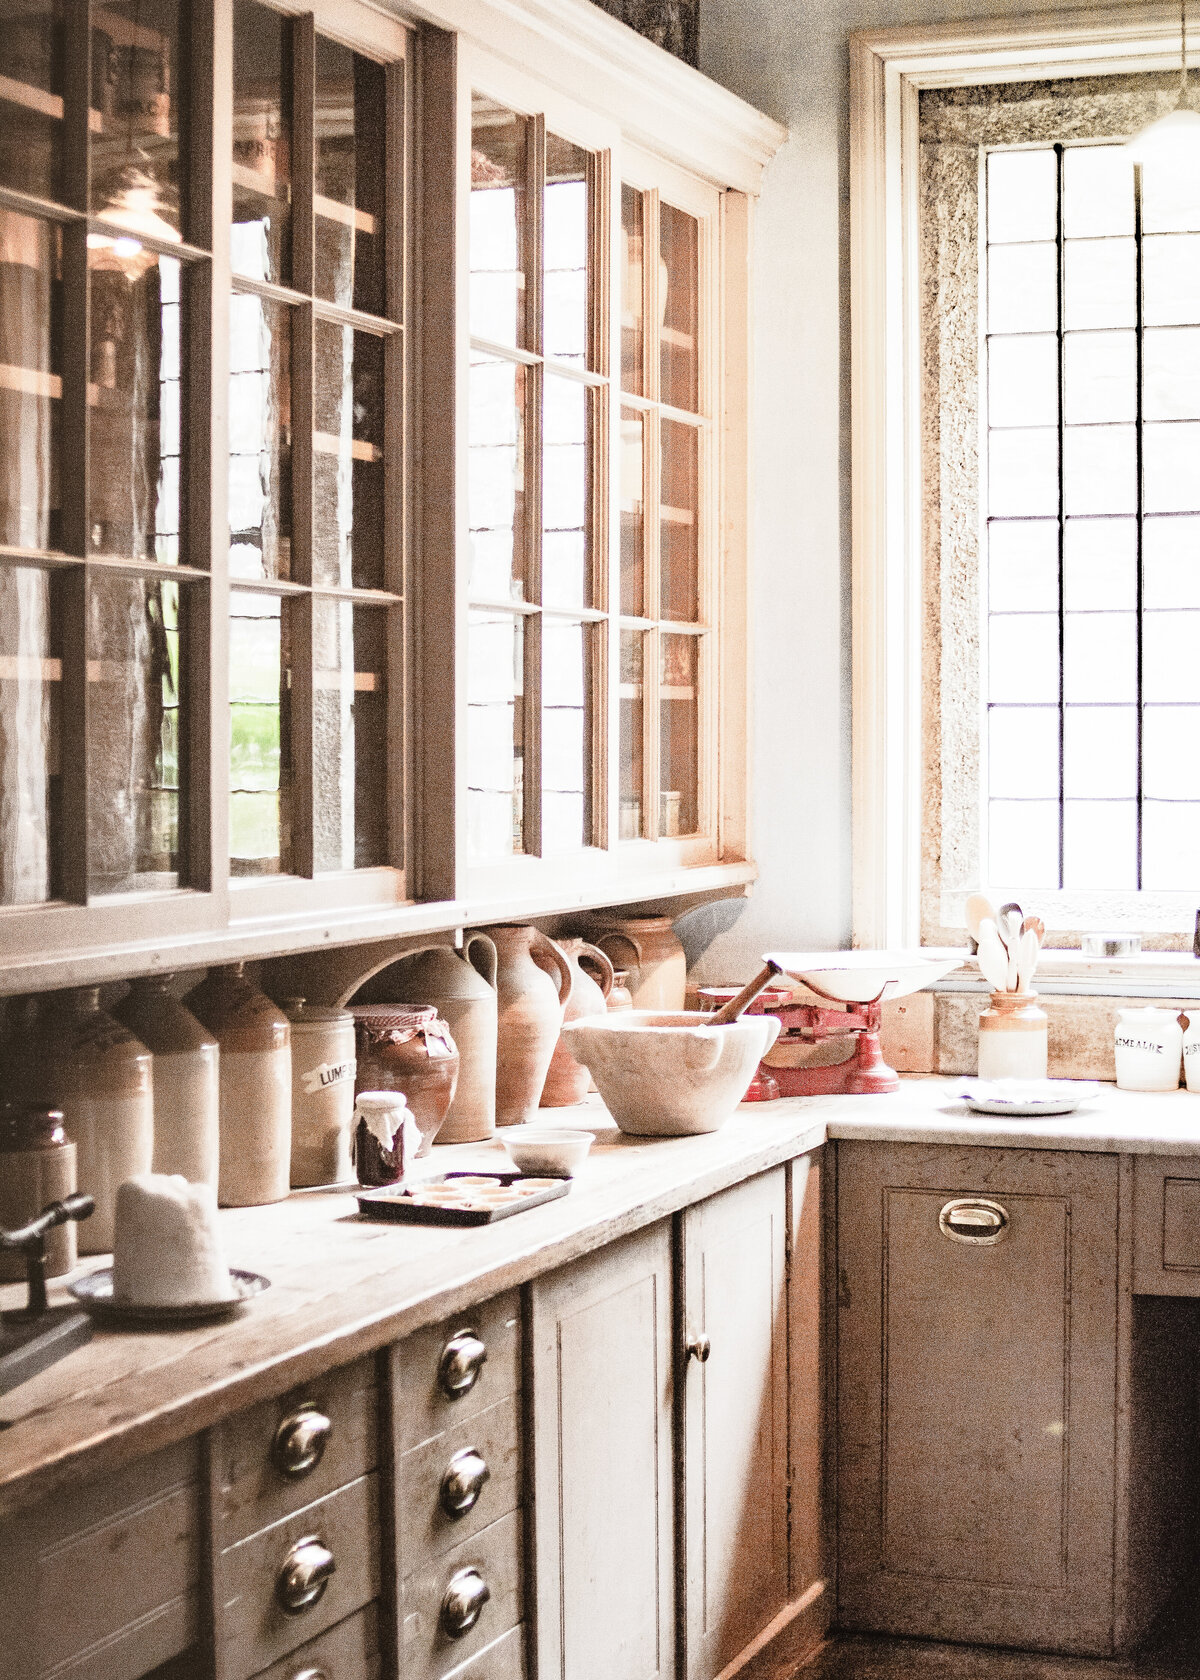 Natural wooden units hold traditional pottery milk churns in a rustic utility room.